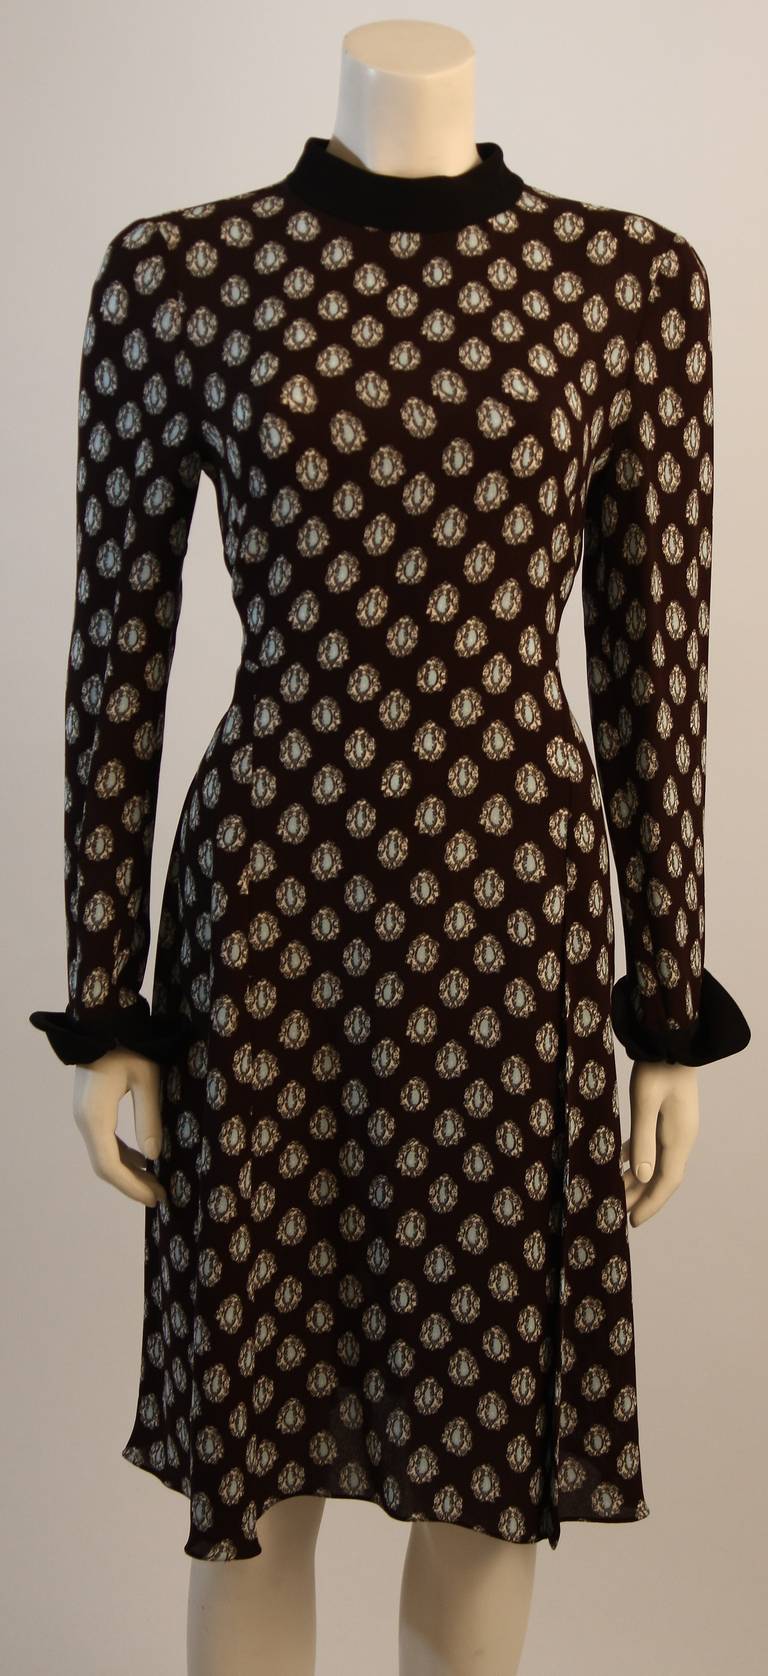 This is a chic Marni day dress. The dress features a wonderful brown and blue print with a mock neck. The skirt is designed with a bit of a flare which is beautifully balanced by a fabulous cuff. There is a center back zipper. Original tags